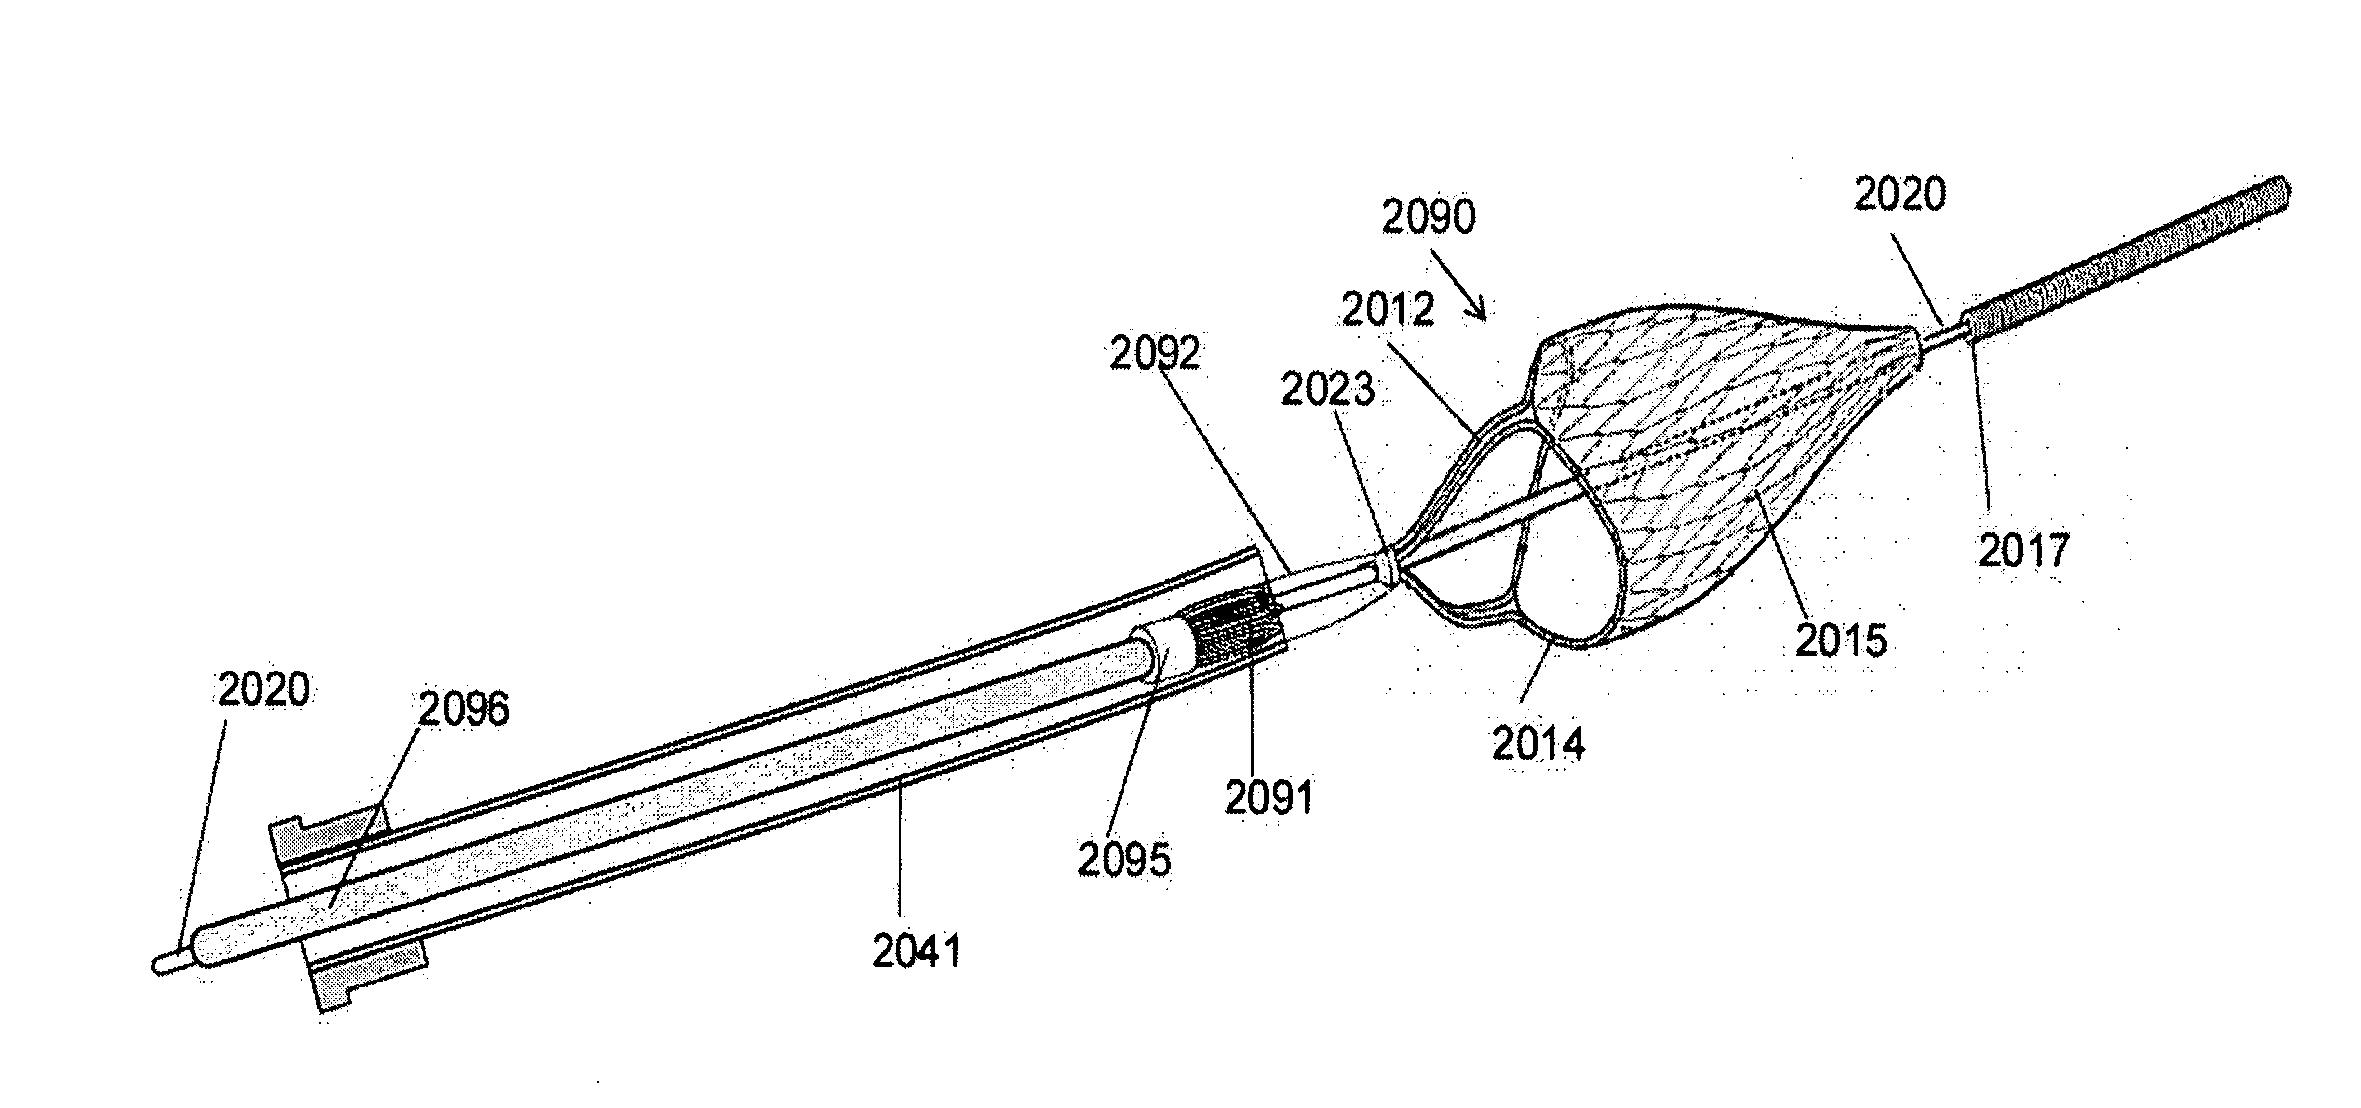 Clot capture systems and associated methods